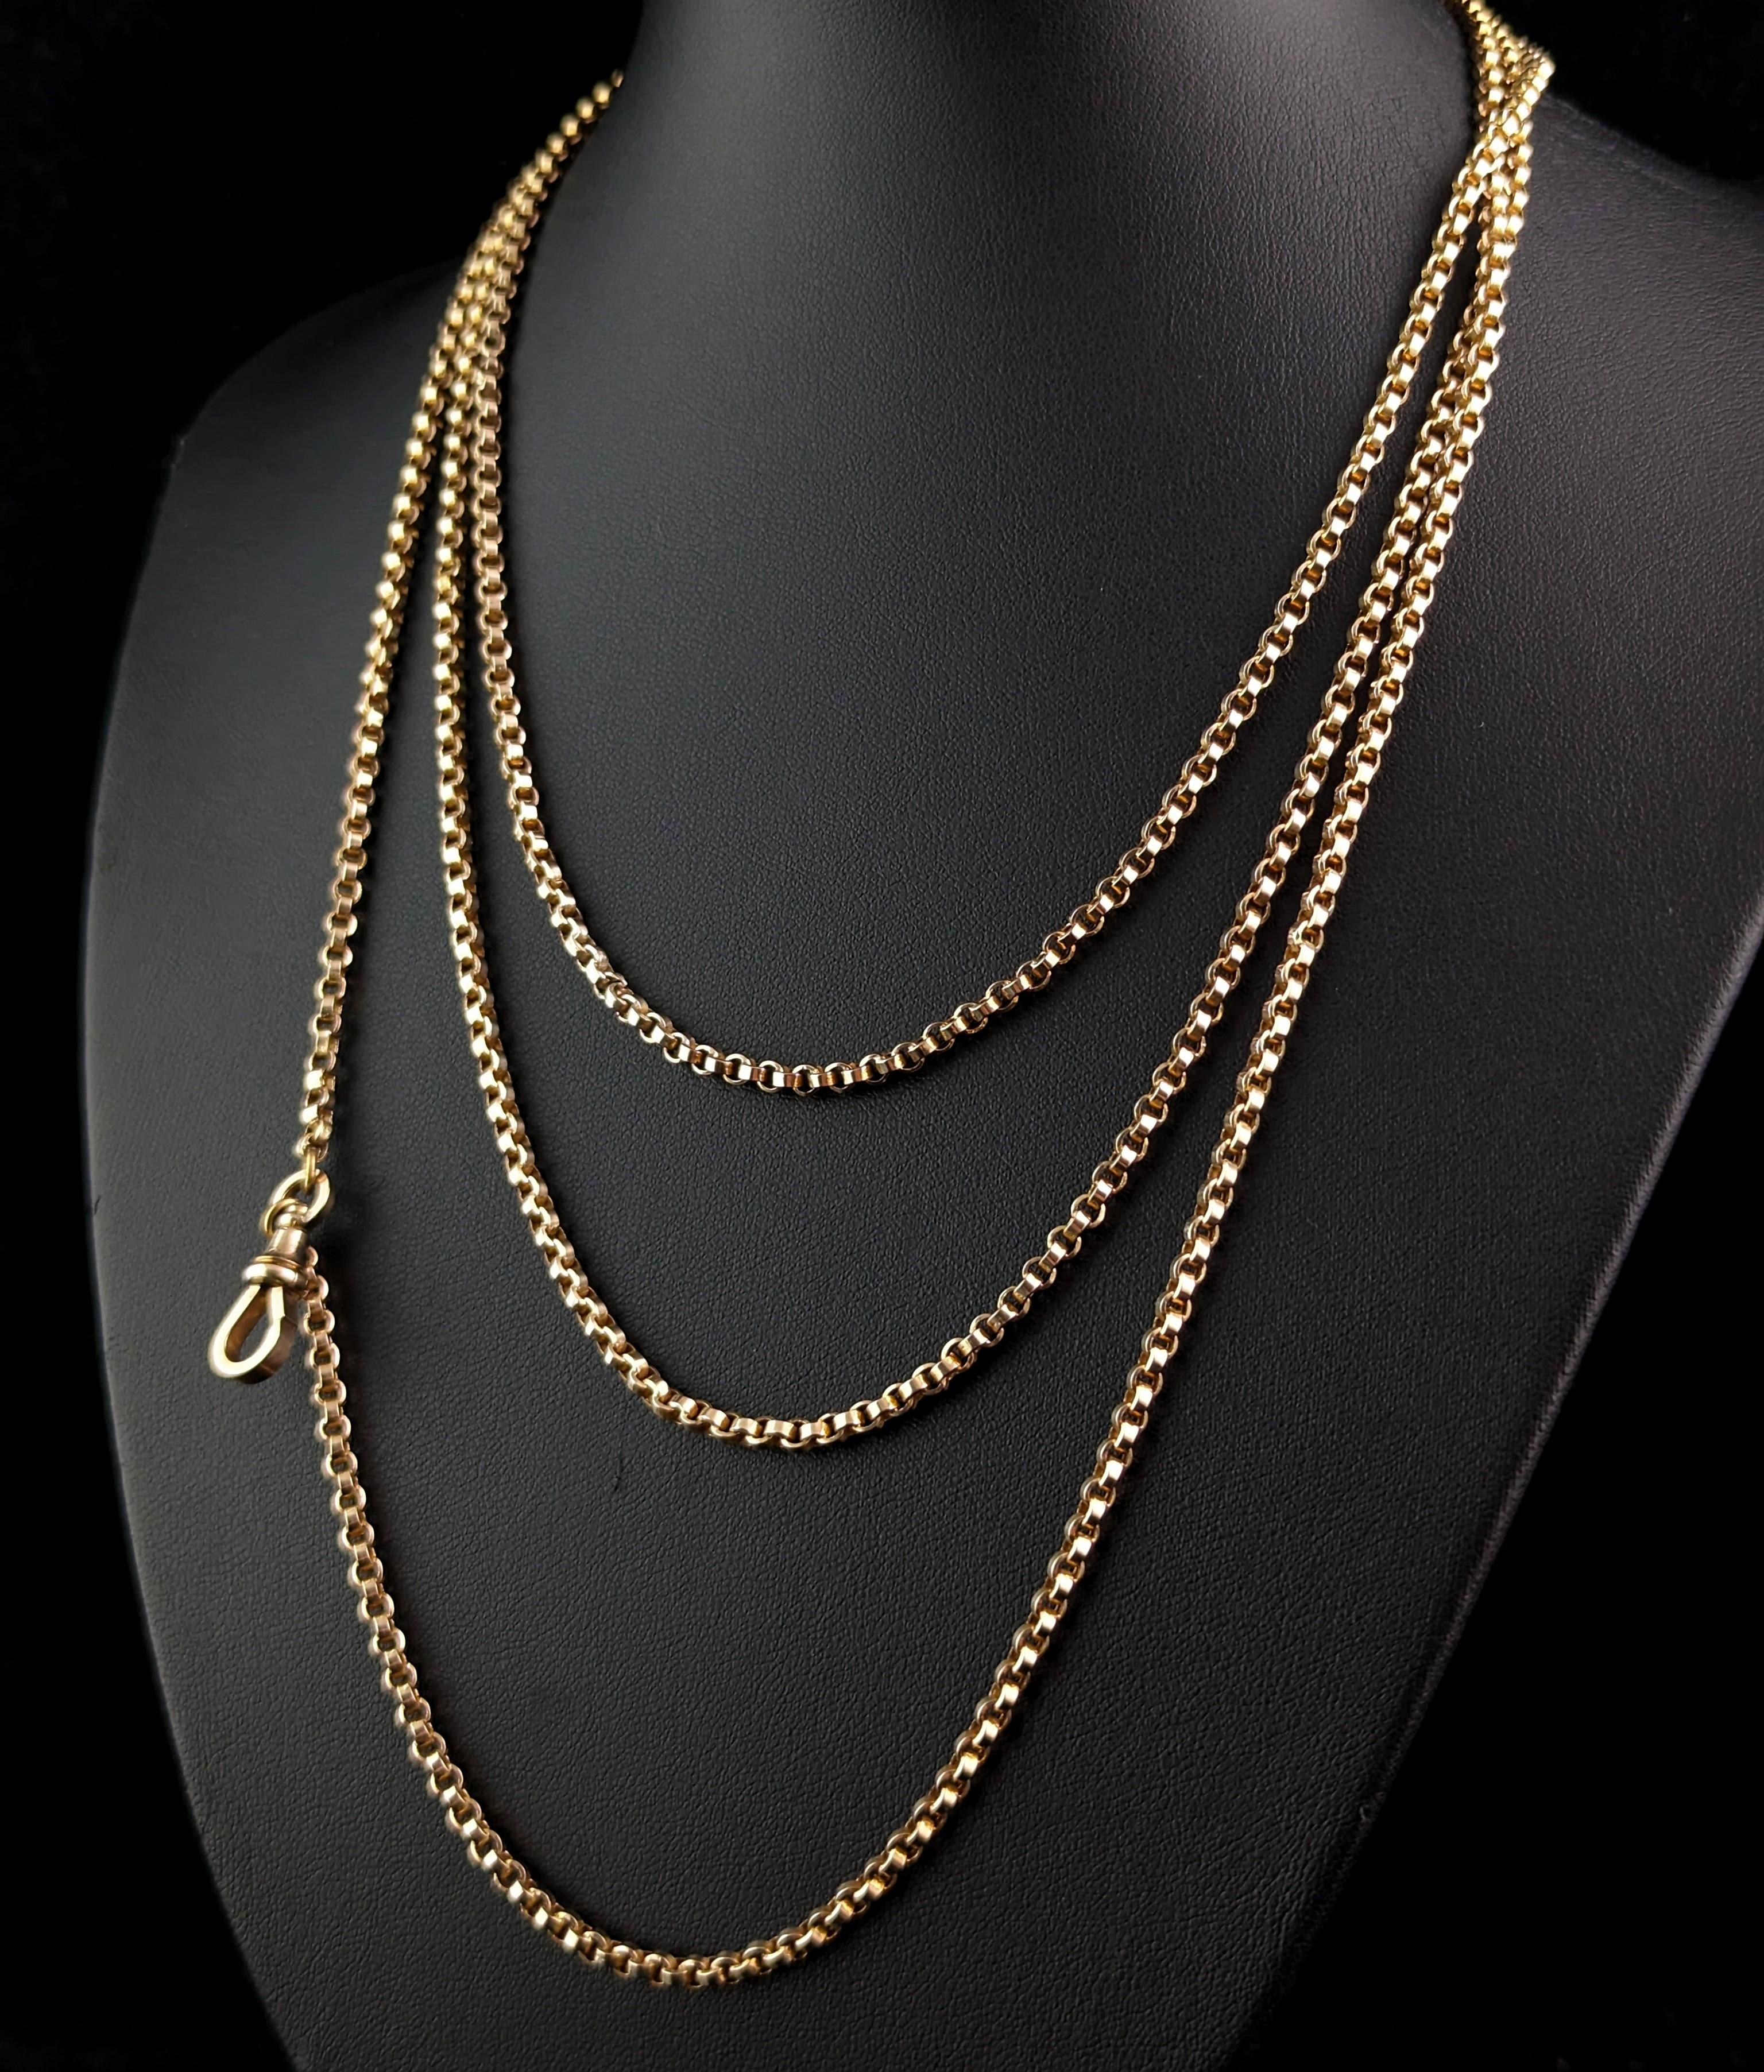 We love a good longuard chain here, such a versatile and wearable piece of jewellery, this antique 9ct gold one is no exception.

You really can't go wrong with a good long chain as they can be worn in so many ways and adorned with so many different